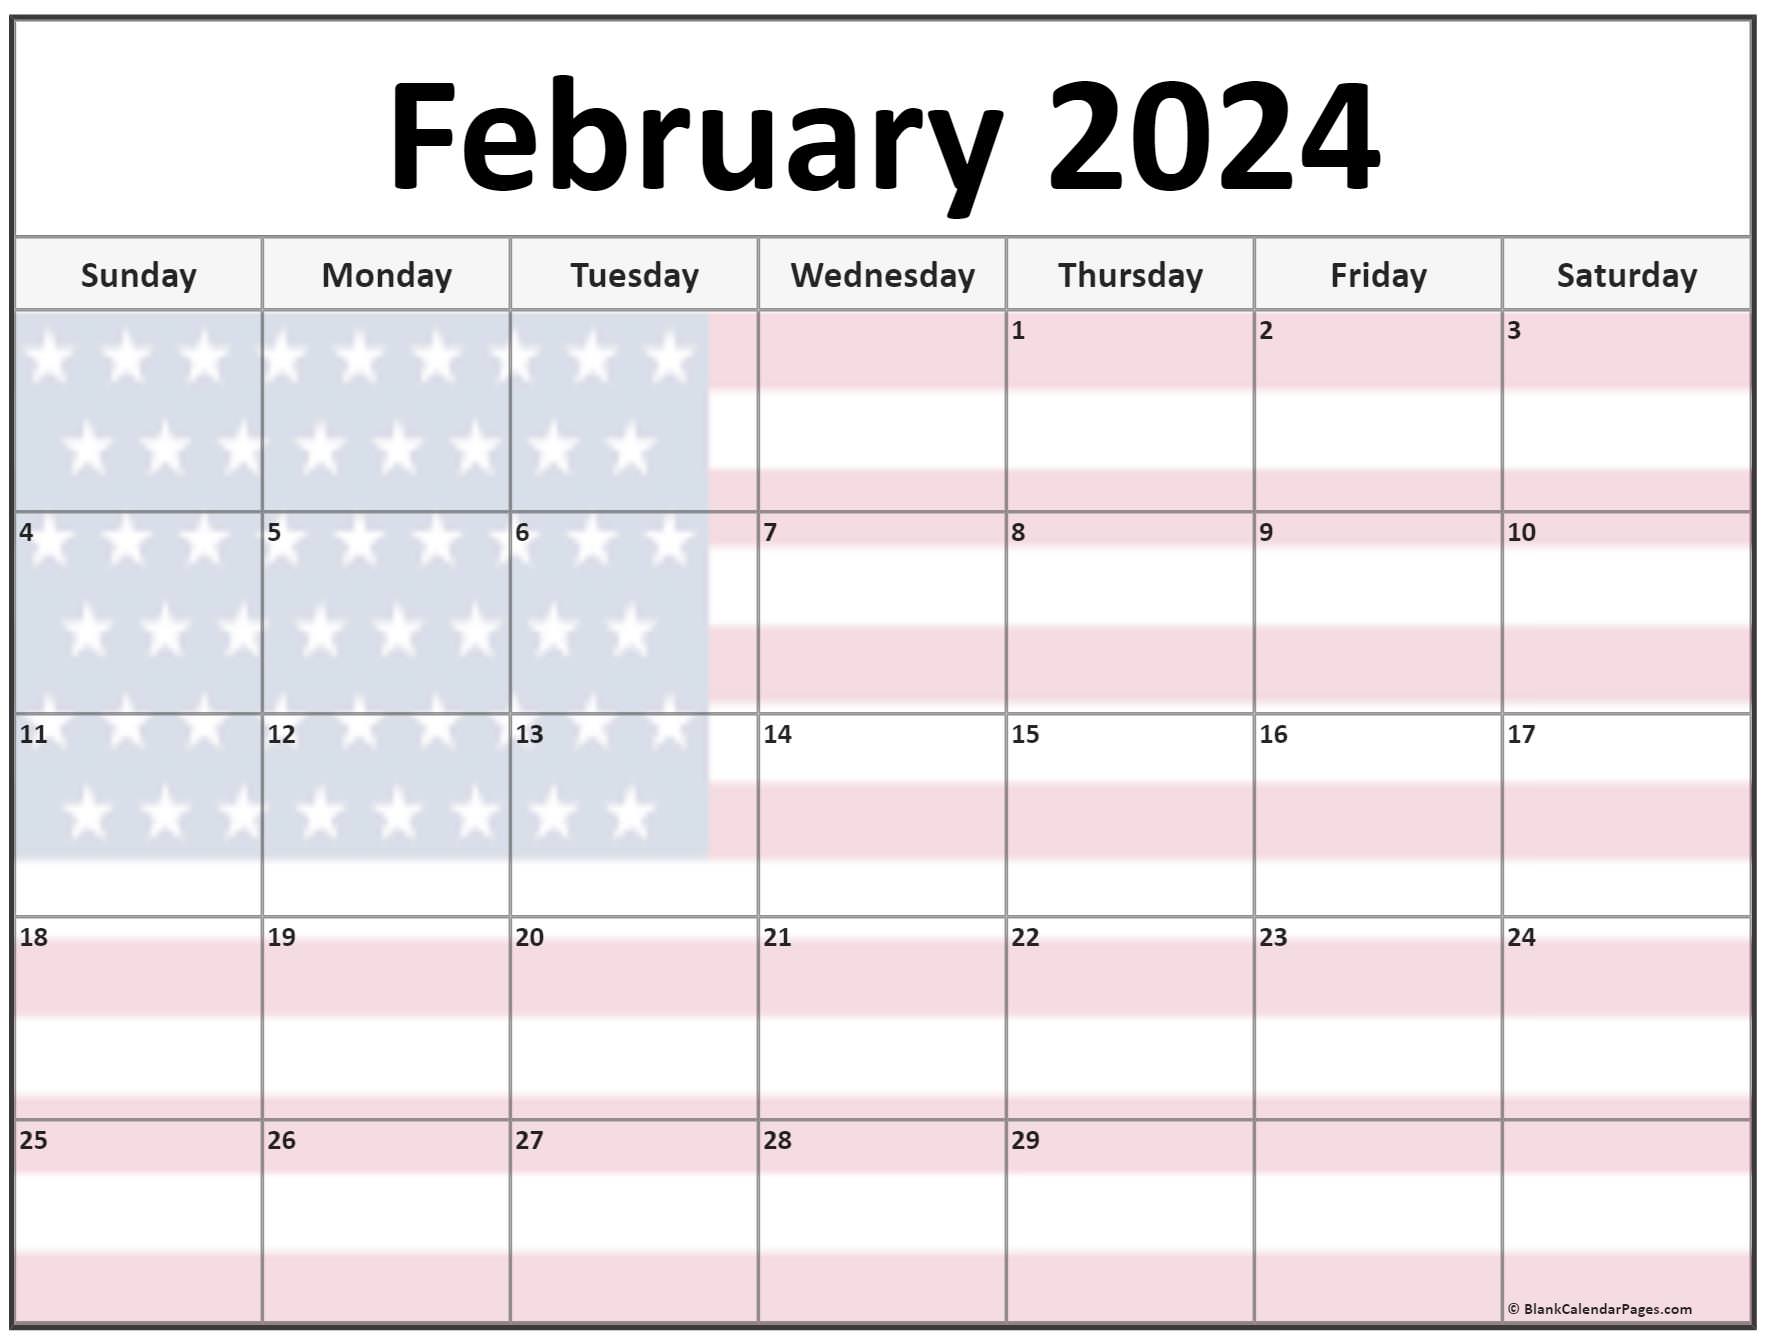 collection-of-february-2024-photo-calendars-with-image-filters